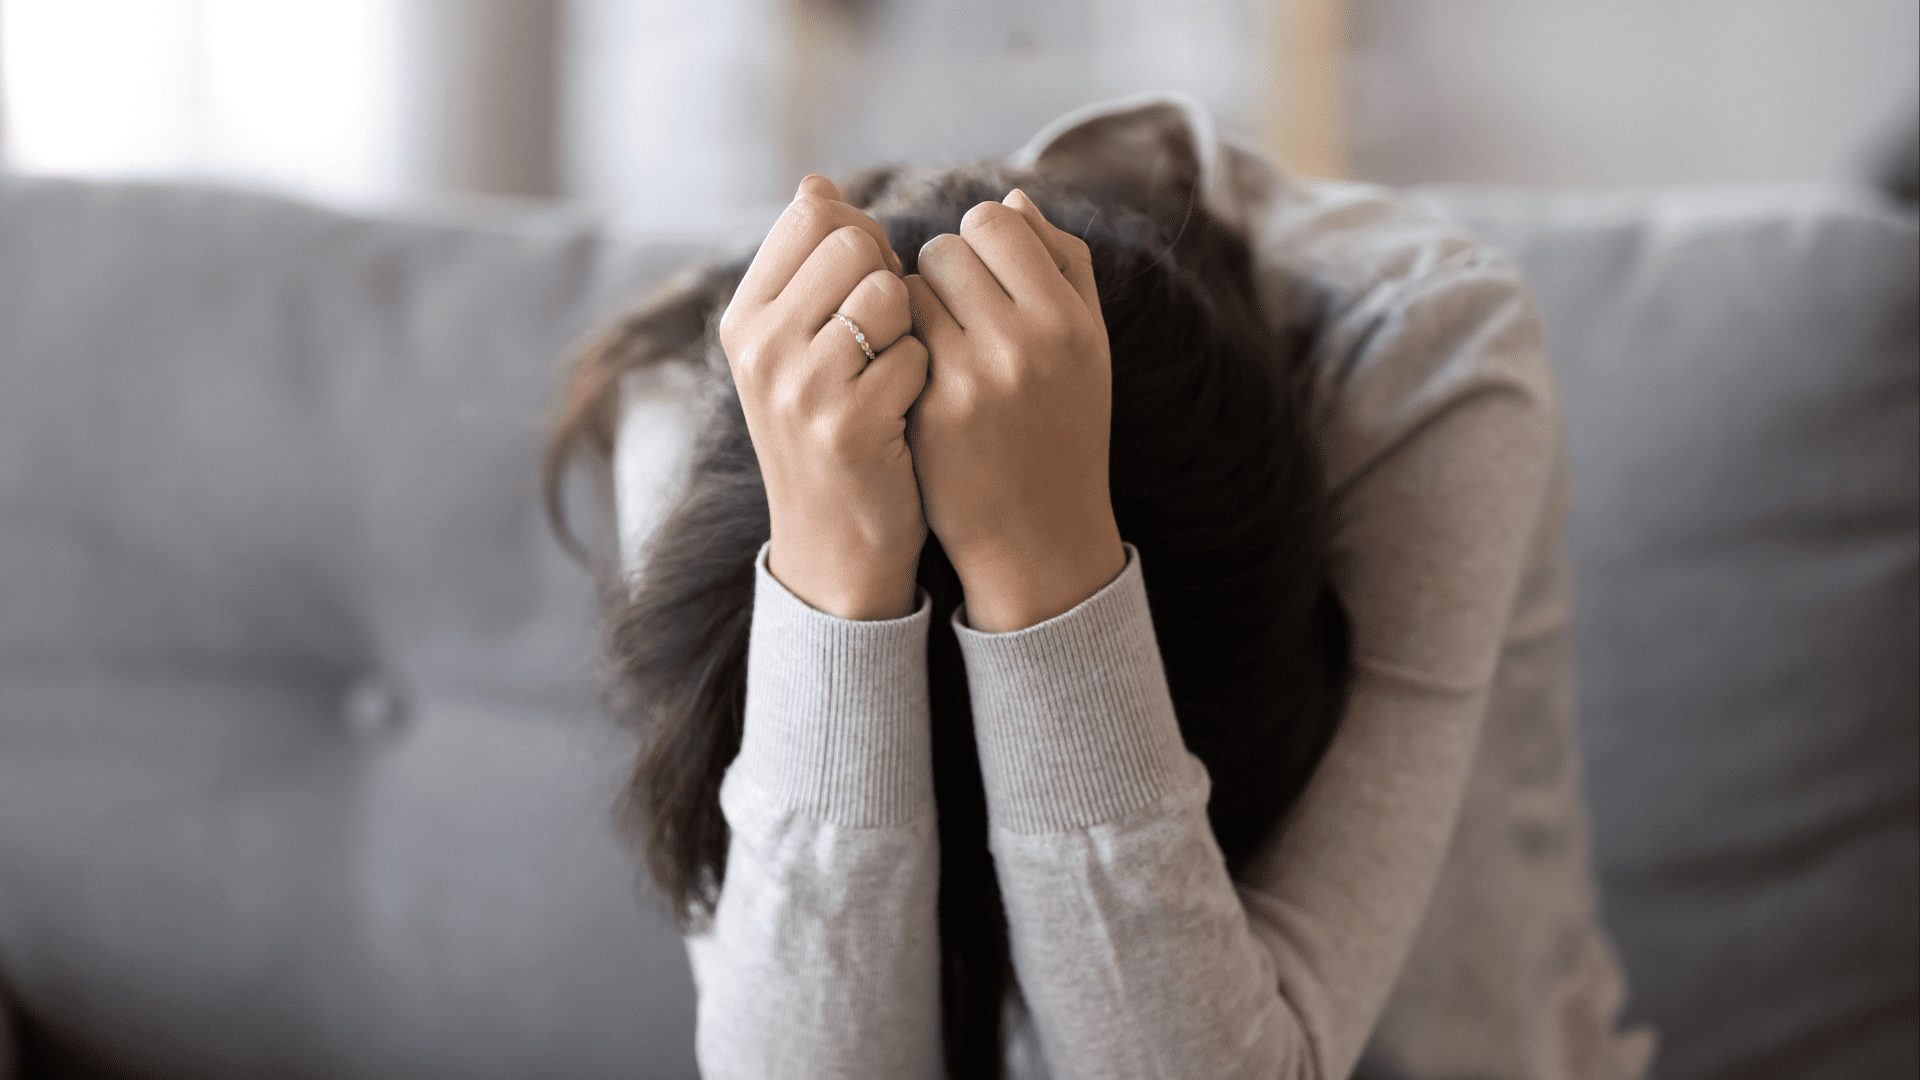 a woman sitting on a couch wuth her head in. her hands who is depressed and wondering what causes depression